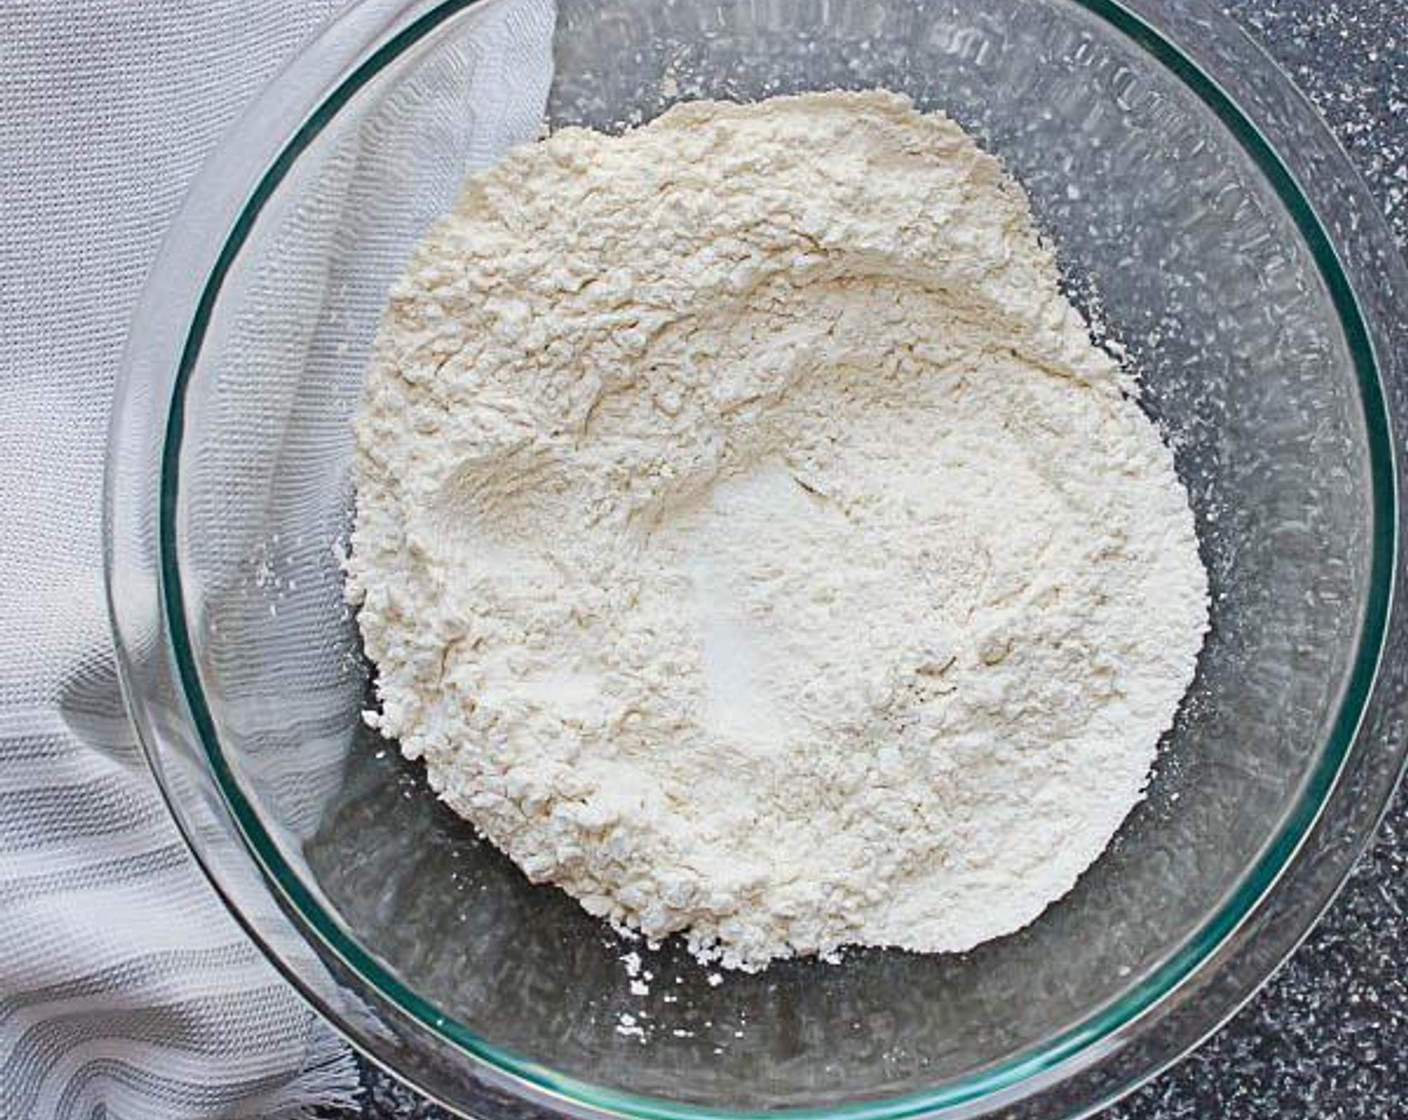 step 3 In a medium bowl combine the All-Purpose Flour (1 1/2 cups), Baking Powder (1 tsp) and Salt (1/4 tsp). Whisk to combine.